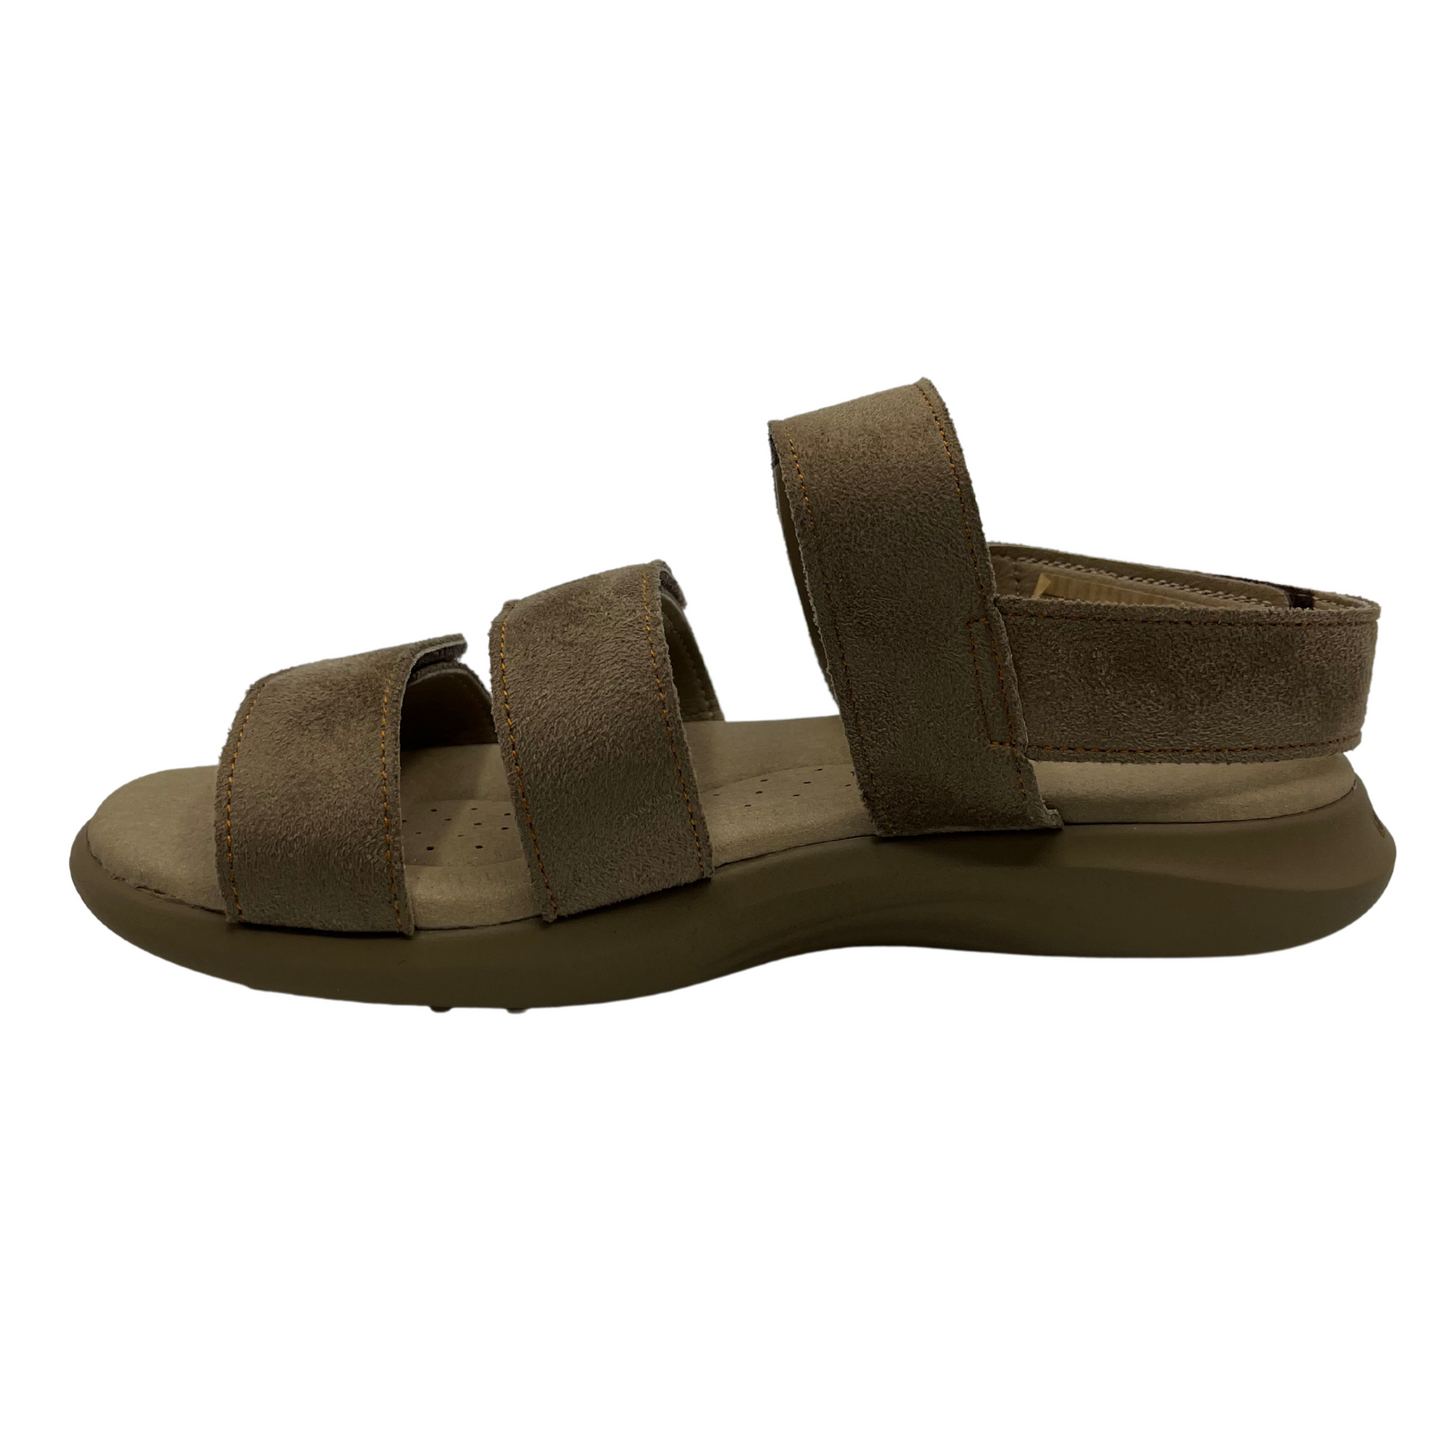 Left facing view of taupe leather sandals with 4 adjustable velcro straps. Cushioned footbed and open toe.